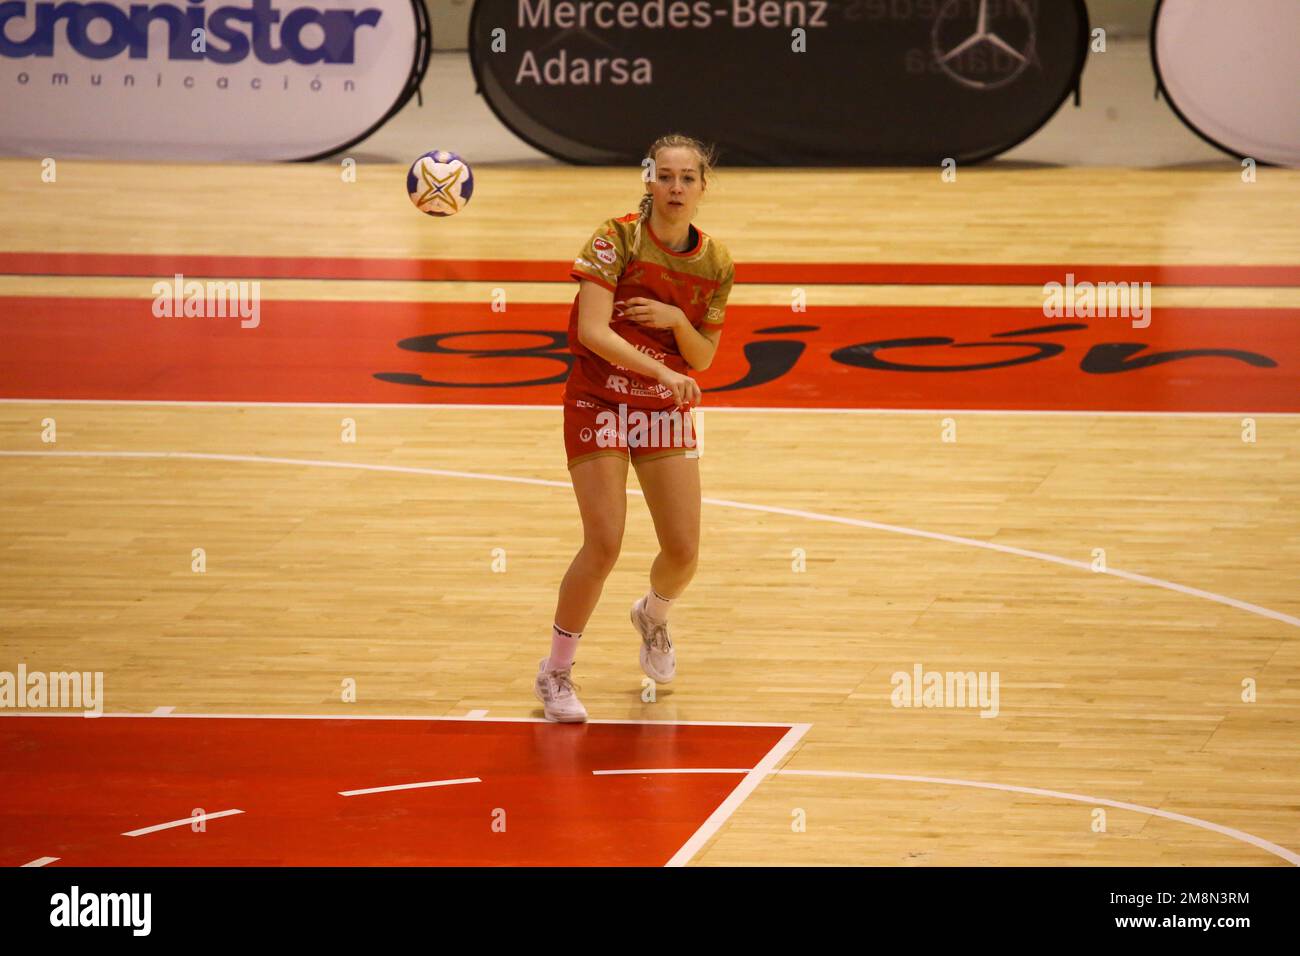 Gijon, Spain. 14th Jan, 2023. Gijon, SPAIN: Hazena Kynzvart's player Veronika Dvorakova (14) passes the ball during the second leg match of the EHF European Cup Women 2022/23 Round of 16 between Motive.co Gijon and Hazena Kynzvart with result of 35-23 for the locals played at the Pabellón de Deportes de La Guía - Presidente Adolfo Suarez in Gijon, Spain on January 14, 2023. (Photo by Alberto Brevers/Pacific Press) Credit: Pacific Press Media Production Corp./Alamy Live News Stock Photo